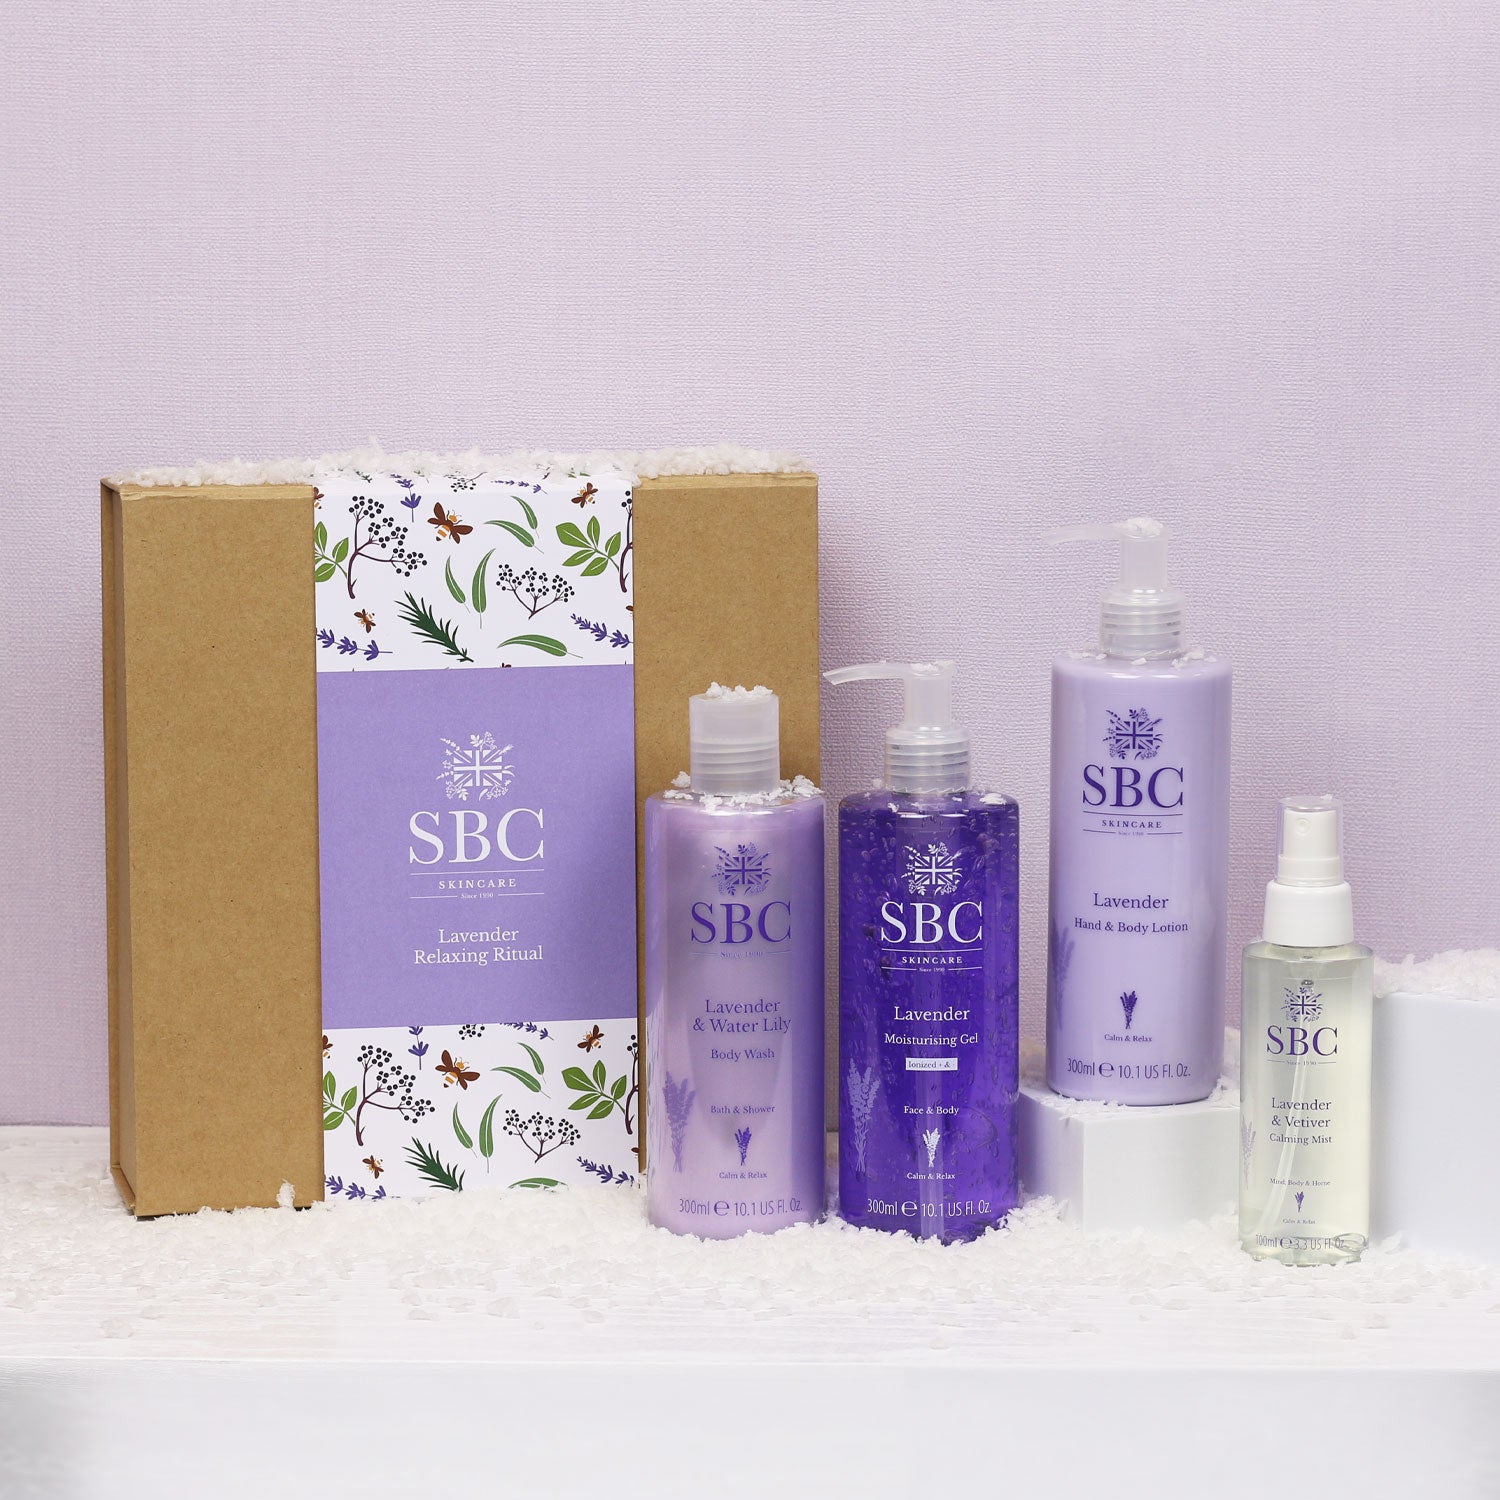 SBC Skincare’s Lavender Relaxing Ritual on a purple background with faux snow